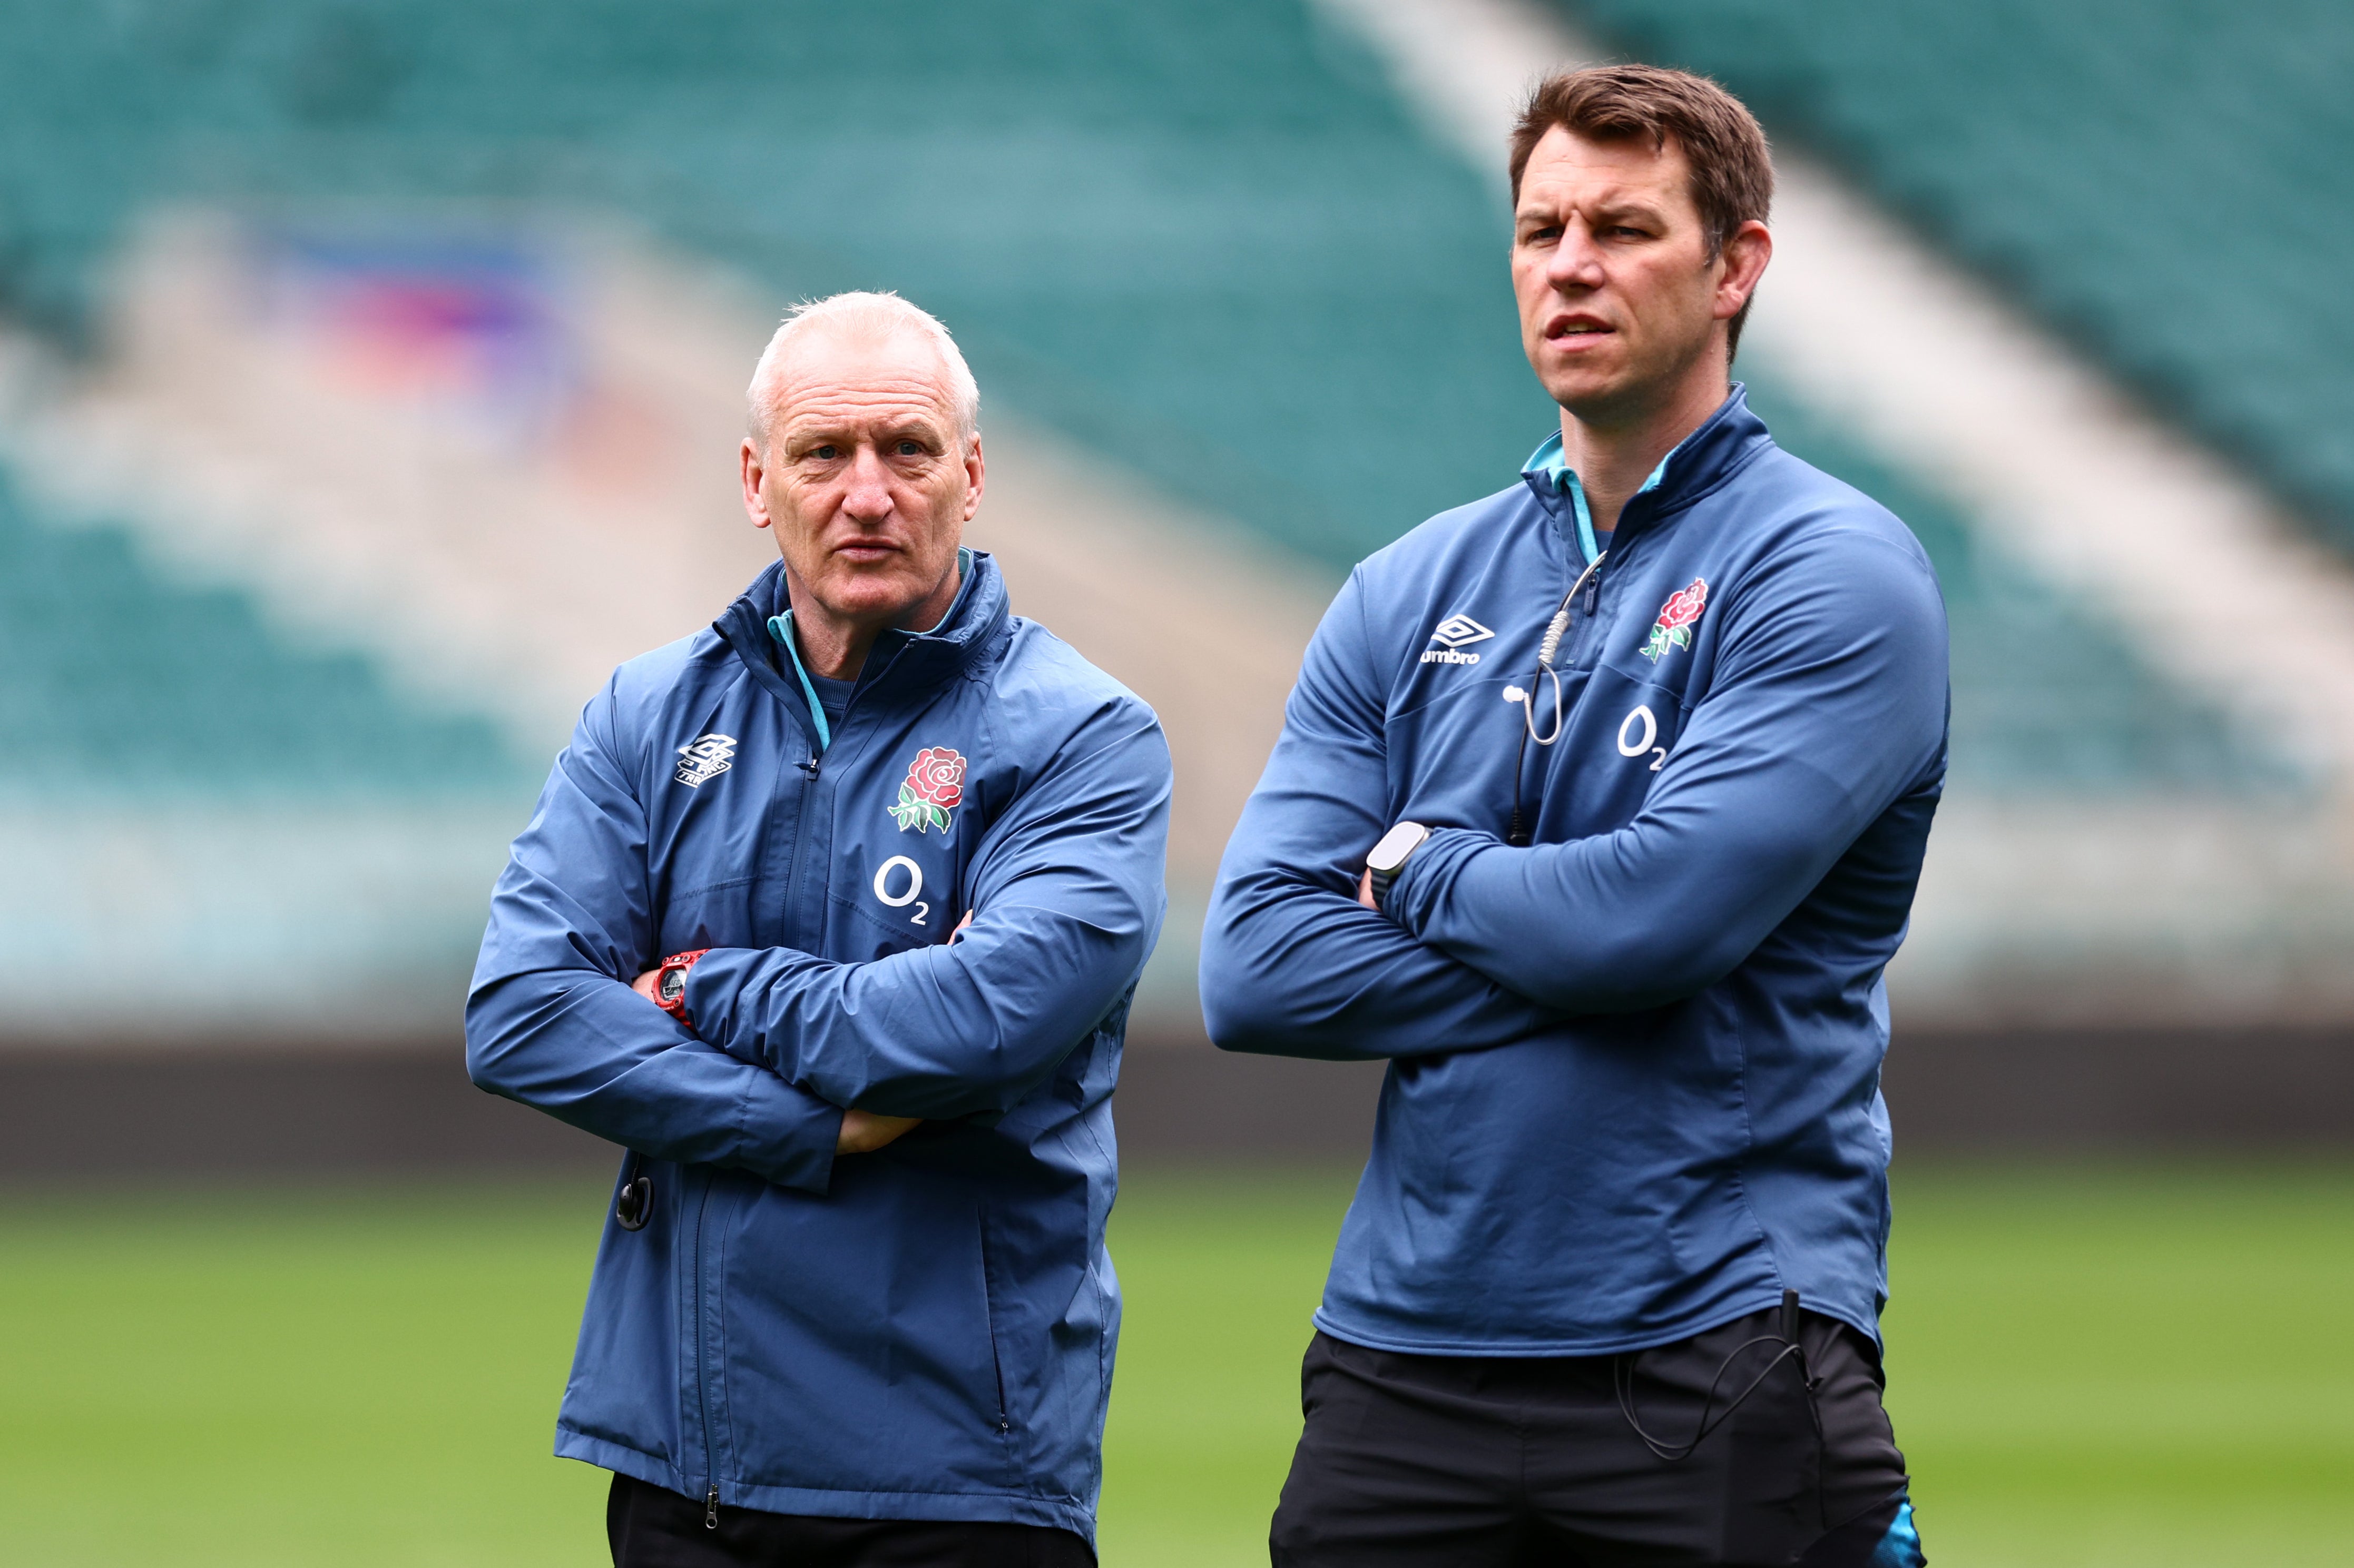 Louis Deacon (right) has been in interim charge of England since Simon Middleton’s departure